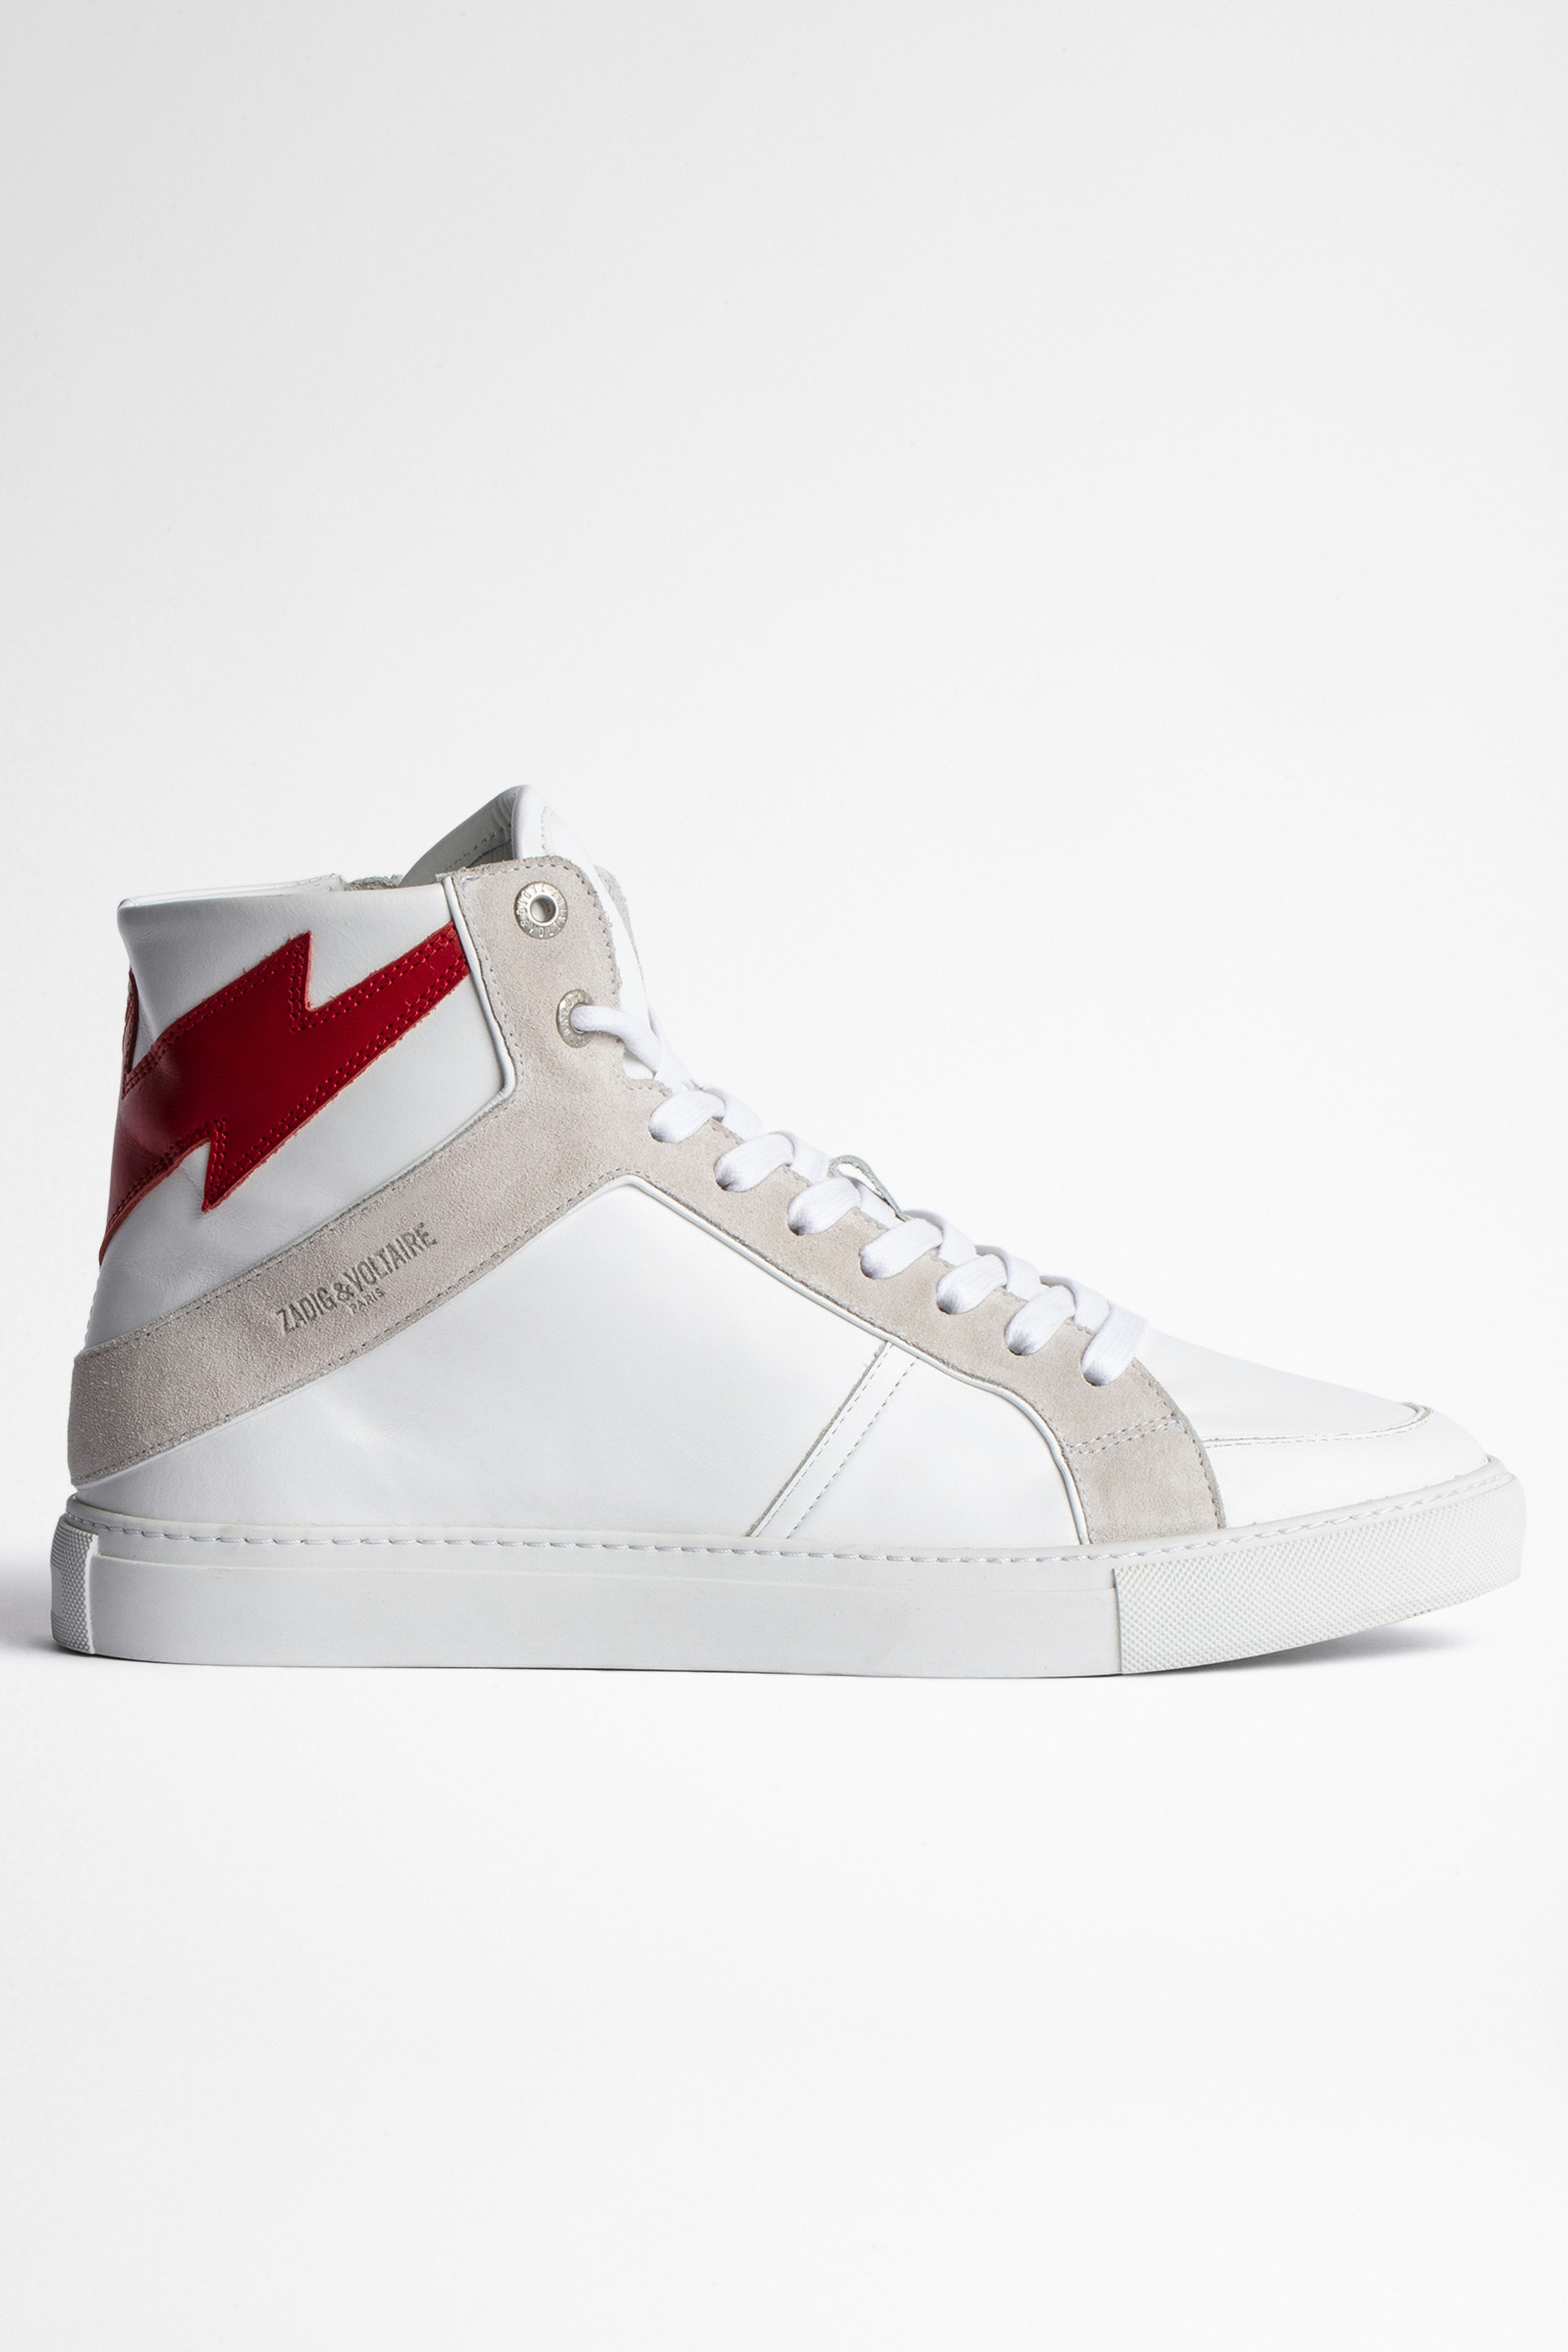 ZV1747 High Flash Trainers - Men’s white leather high-top sneakers with contrasting lightning bolt insert